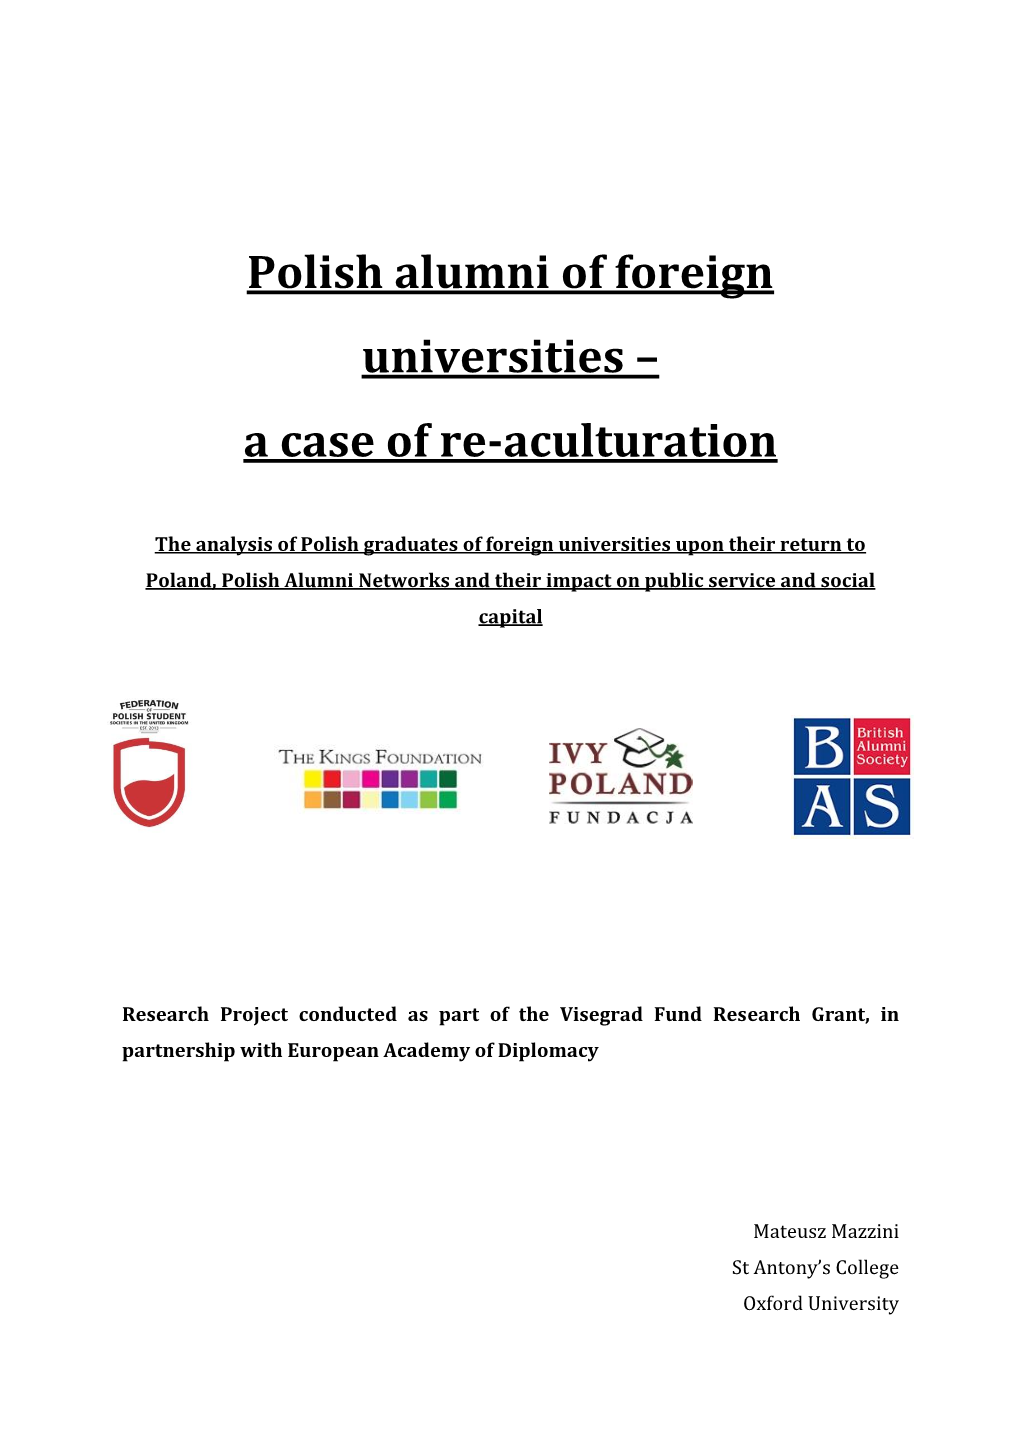 Polish Alumni of Foreign Universities – a Case of Re-Aculturation